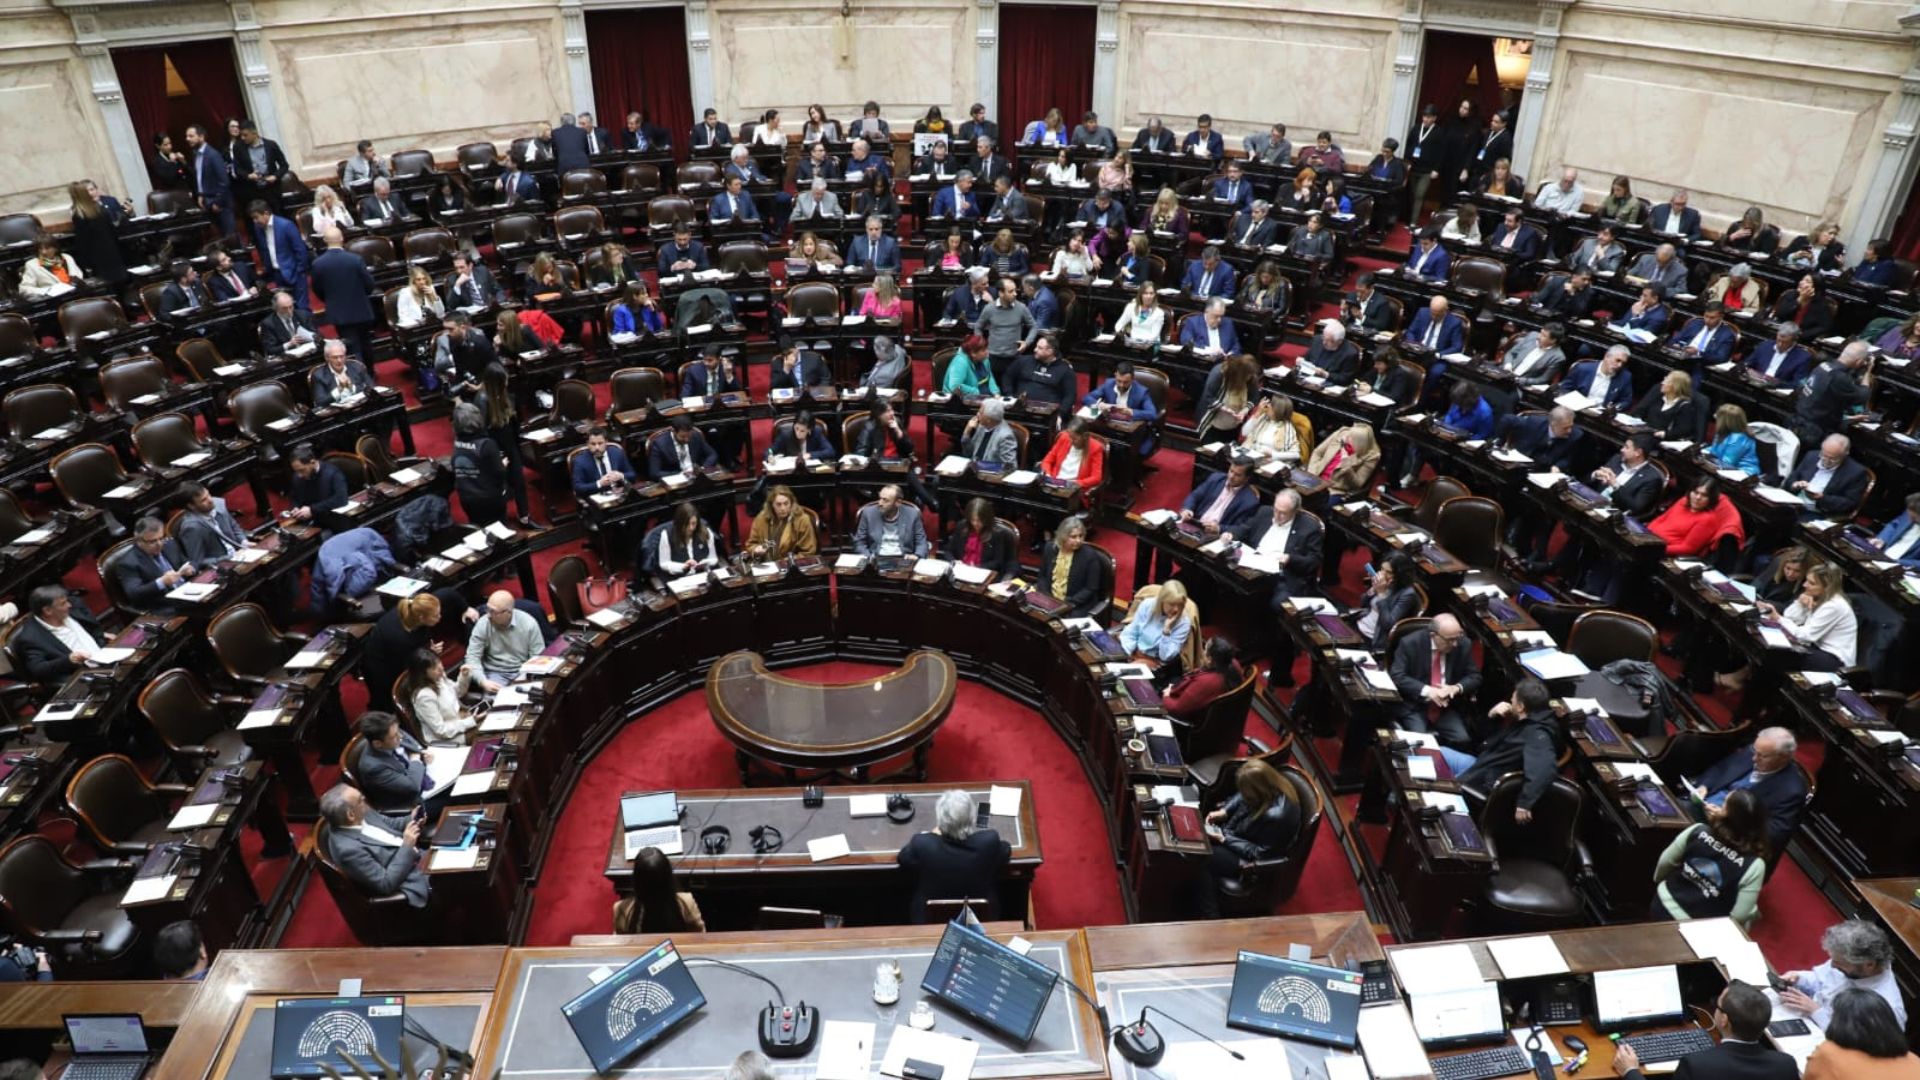 Lower Chamber approves raising income tax threshold after broad political agreement